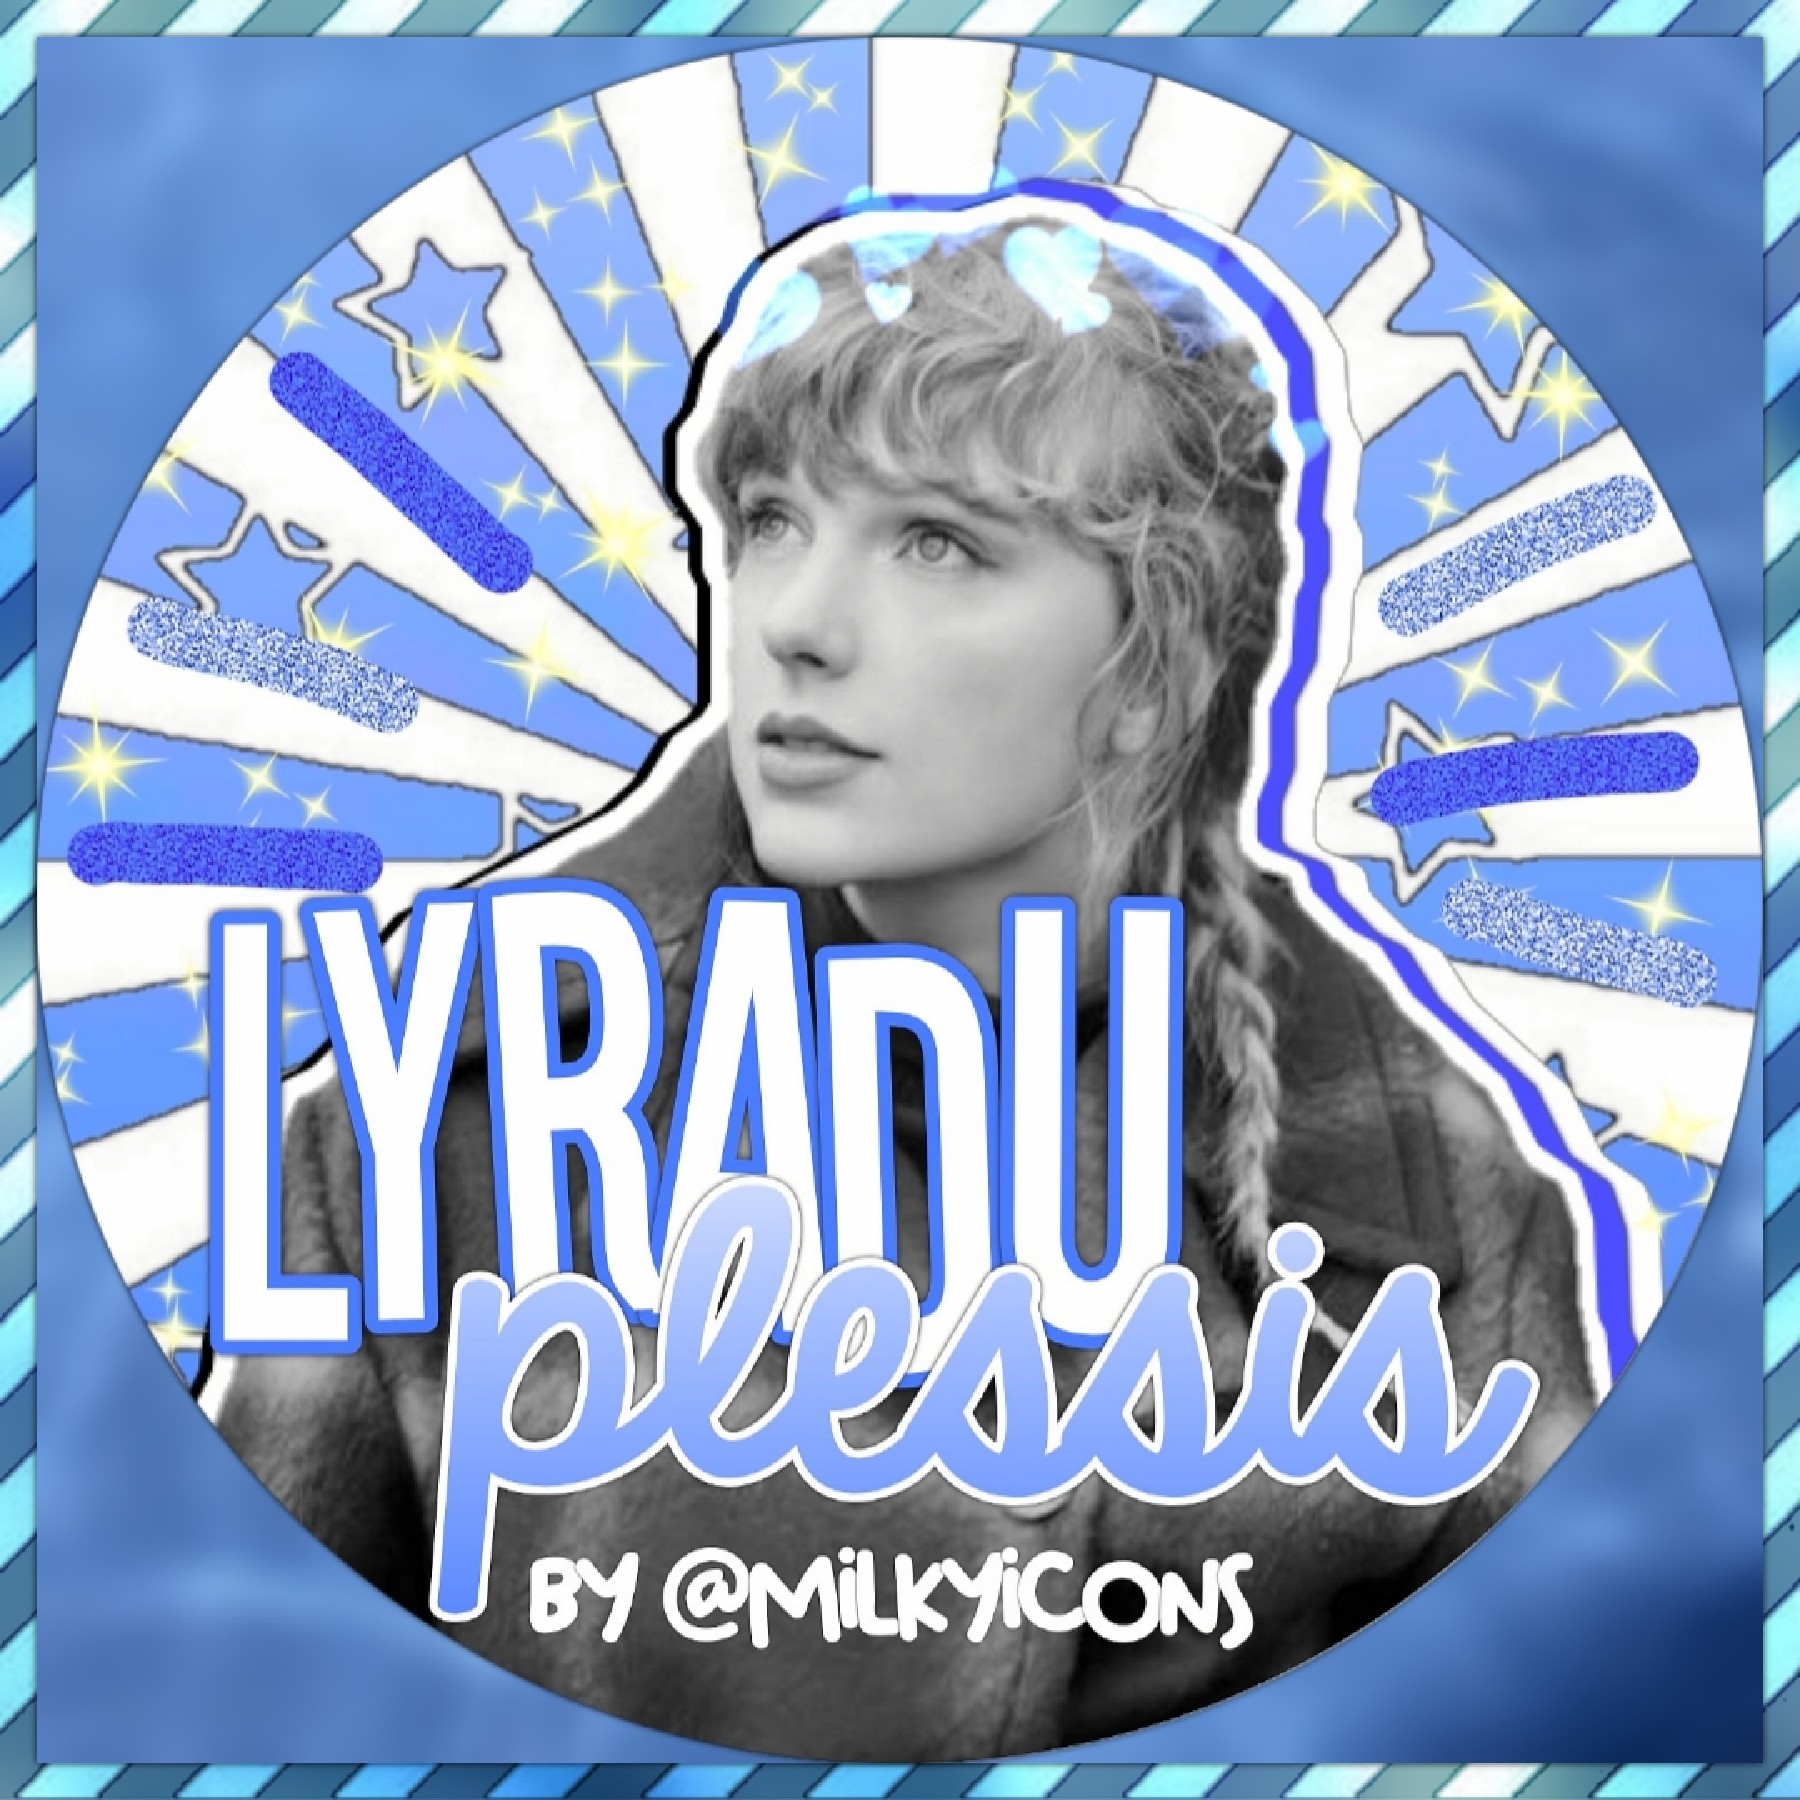 icon for: LyraDuPlessis
style: simple
color: blue💙
hope you like it!💗 pls give credits if used😊